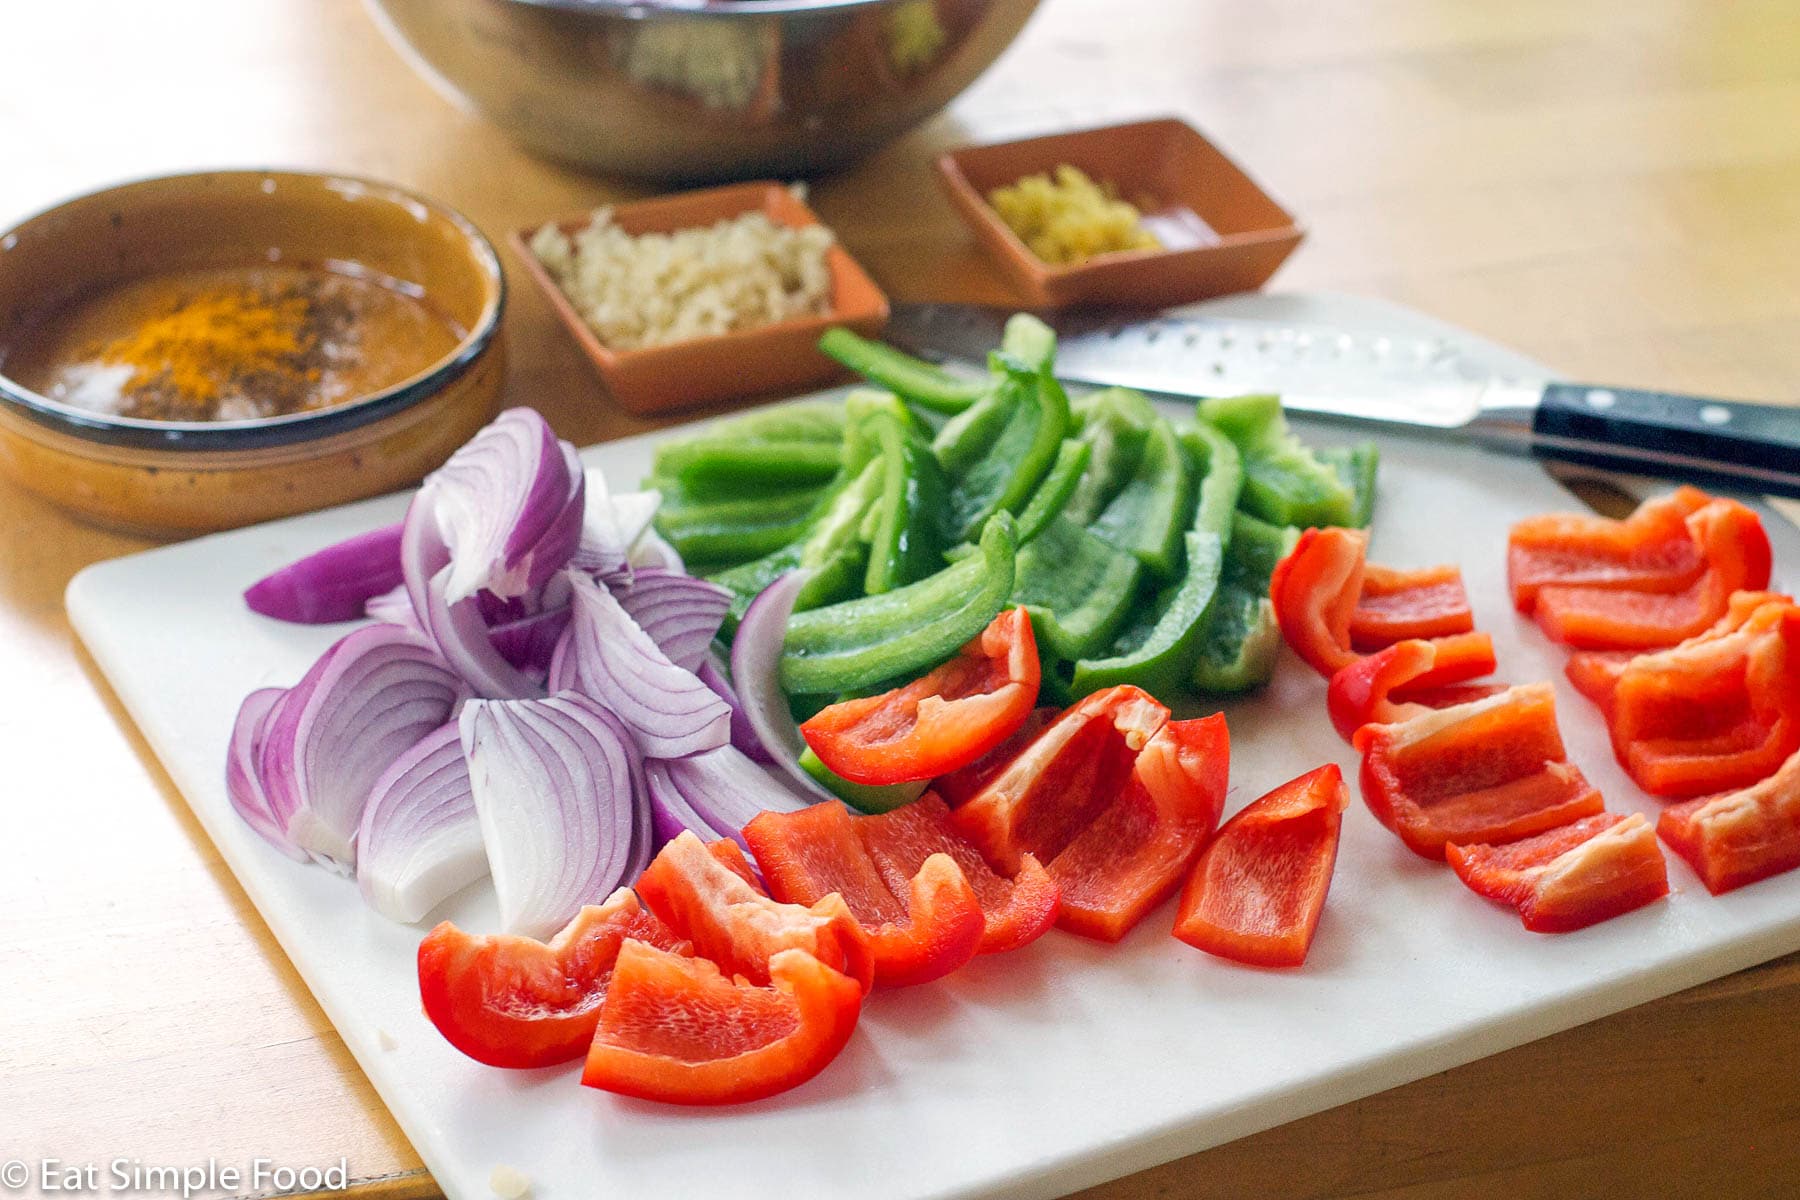 white cutting board with knife on it and sliced red and green bell peppers and red onion. Minced ginger and garic in small orange bowls in the background